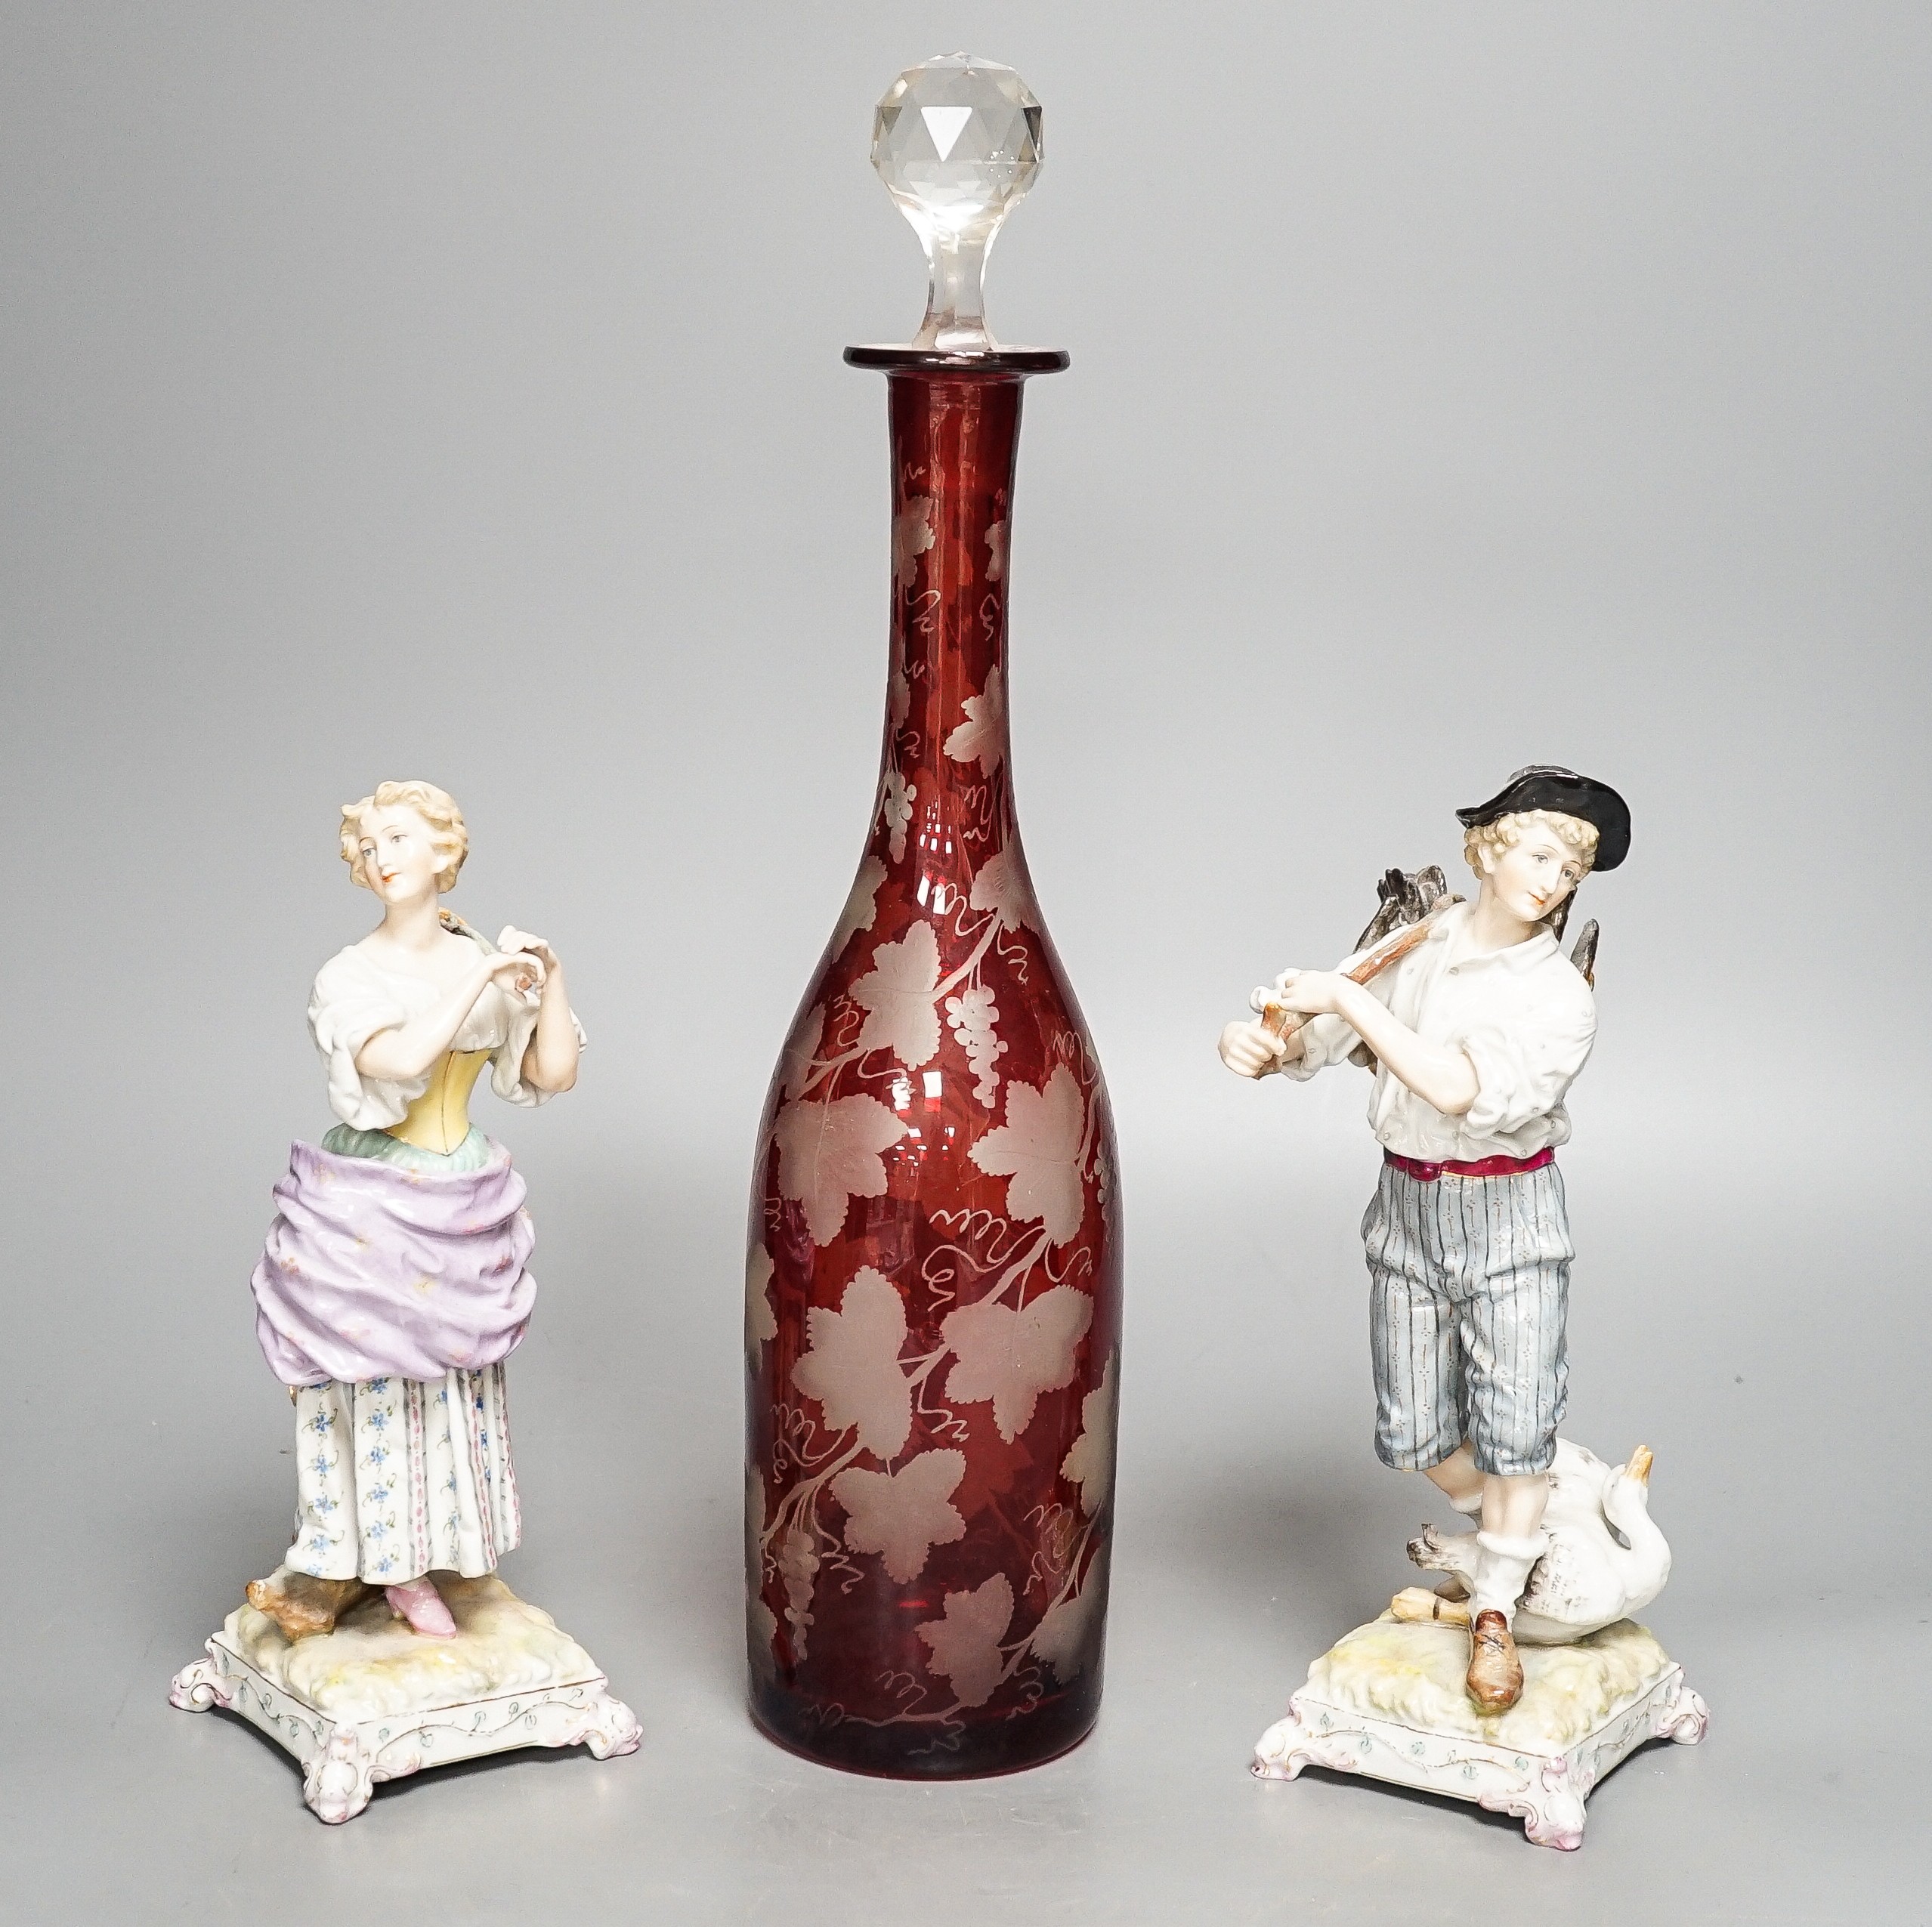 A late 19th century Bohemian wheel engraved ruby glass decanter and a pair of continental porcelain figures, decanter 37 cms high, including stopper.